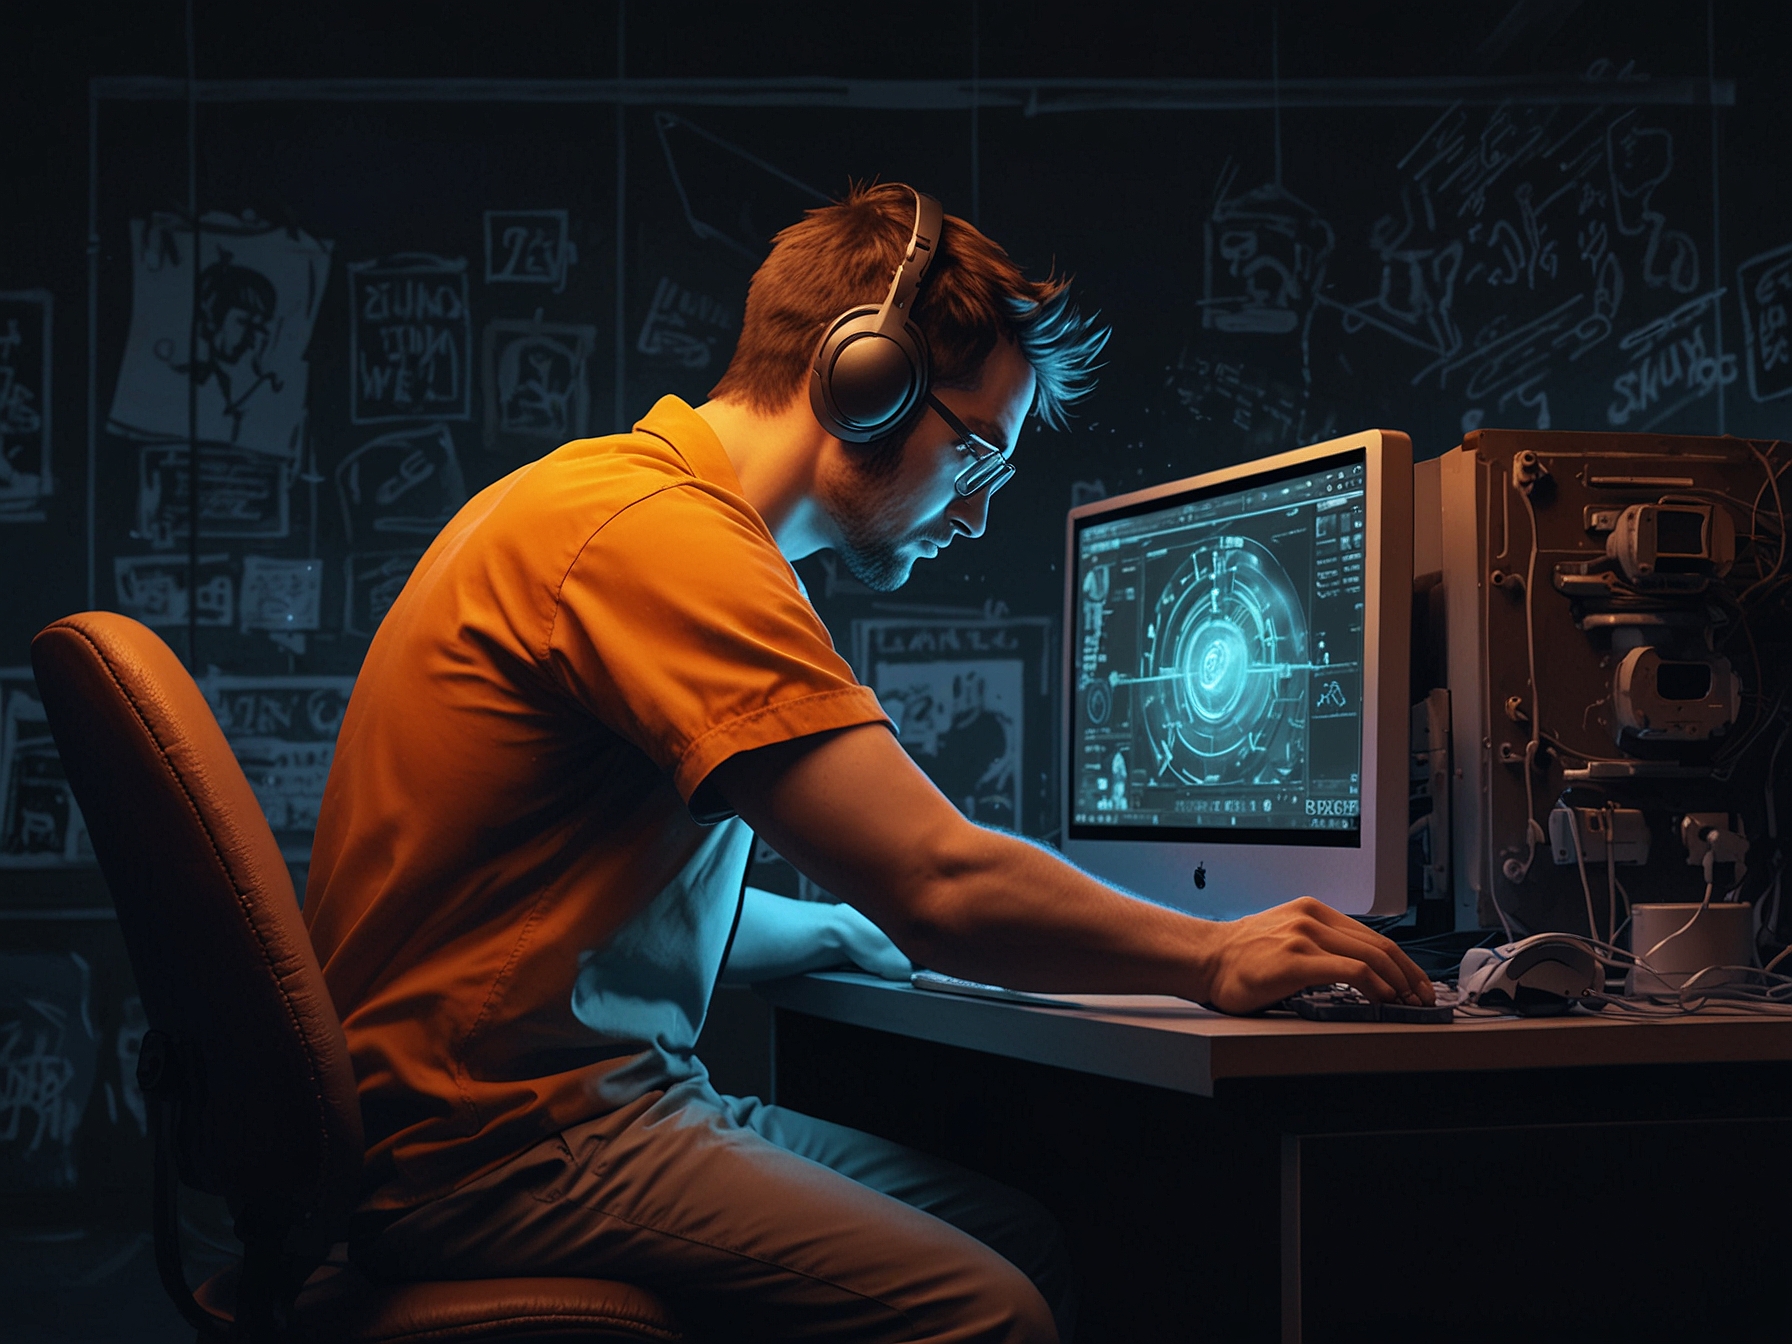 Artwork of the Seamless Co-op mod creator working diligently on a computer, reflecting the community's support and anticipation for the upcoming fix to restore the multiplayer experience.